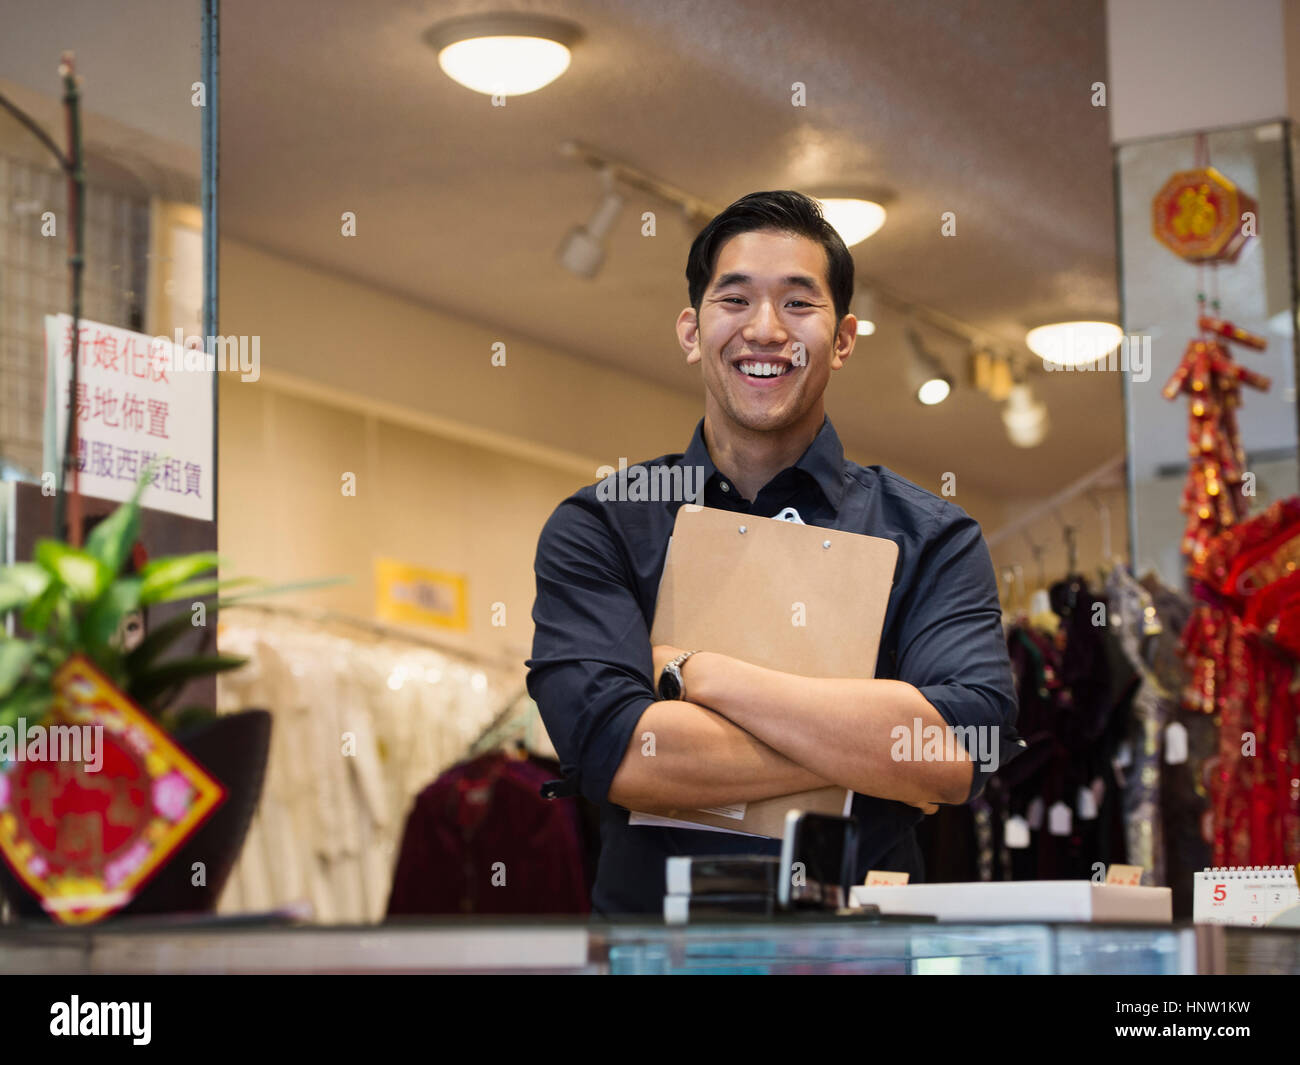 Smiling Chinese man posing with clipboard in store Stock Photo